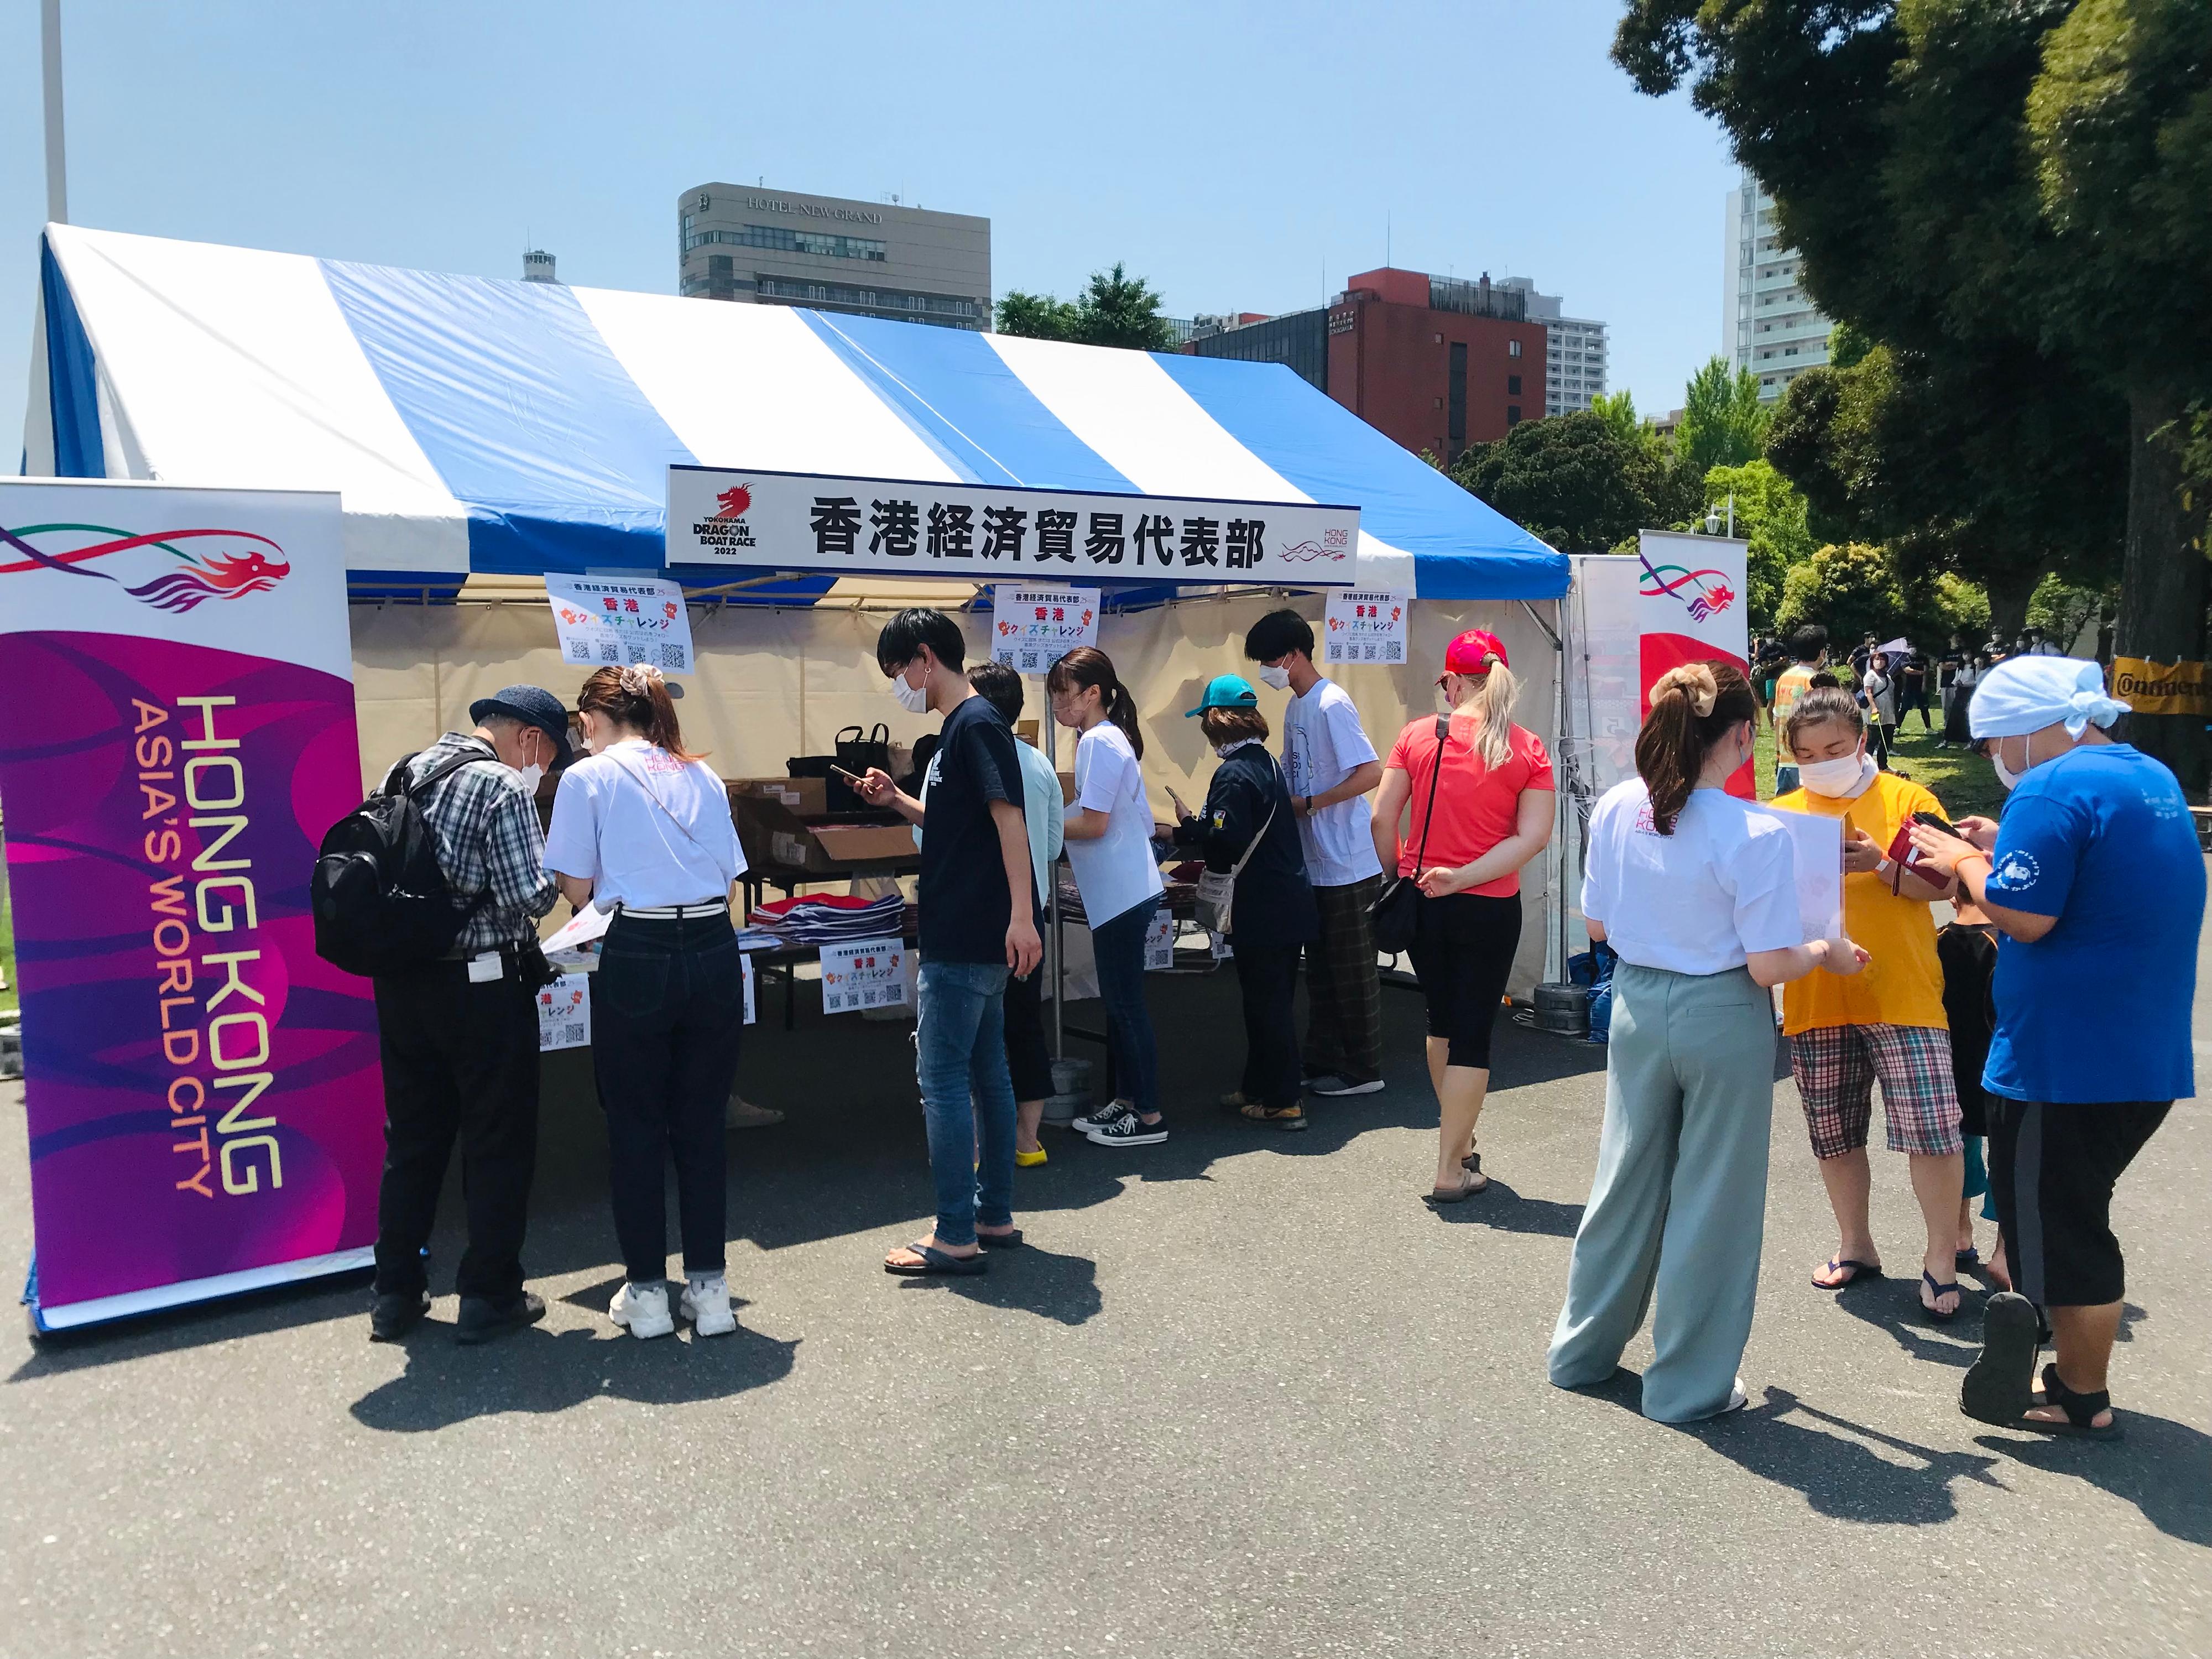 The commemorative Hong Kong Cup dragon boat race to celebrate the 25th anniversary of the establishment of the Hong Kong Special Administrative Region was held at the promenade of Yamashita Park in Yokohama, Japan, today (June 5). Photo shows park visitors at the booth set up at the race venue by the Hong Kong Economic and Trade Office in Tokyo.